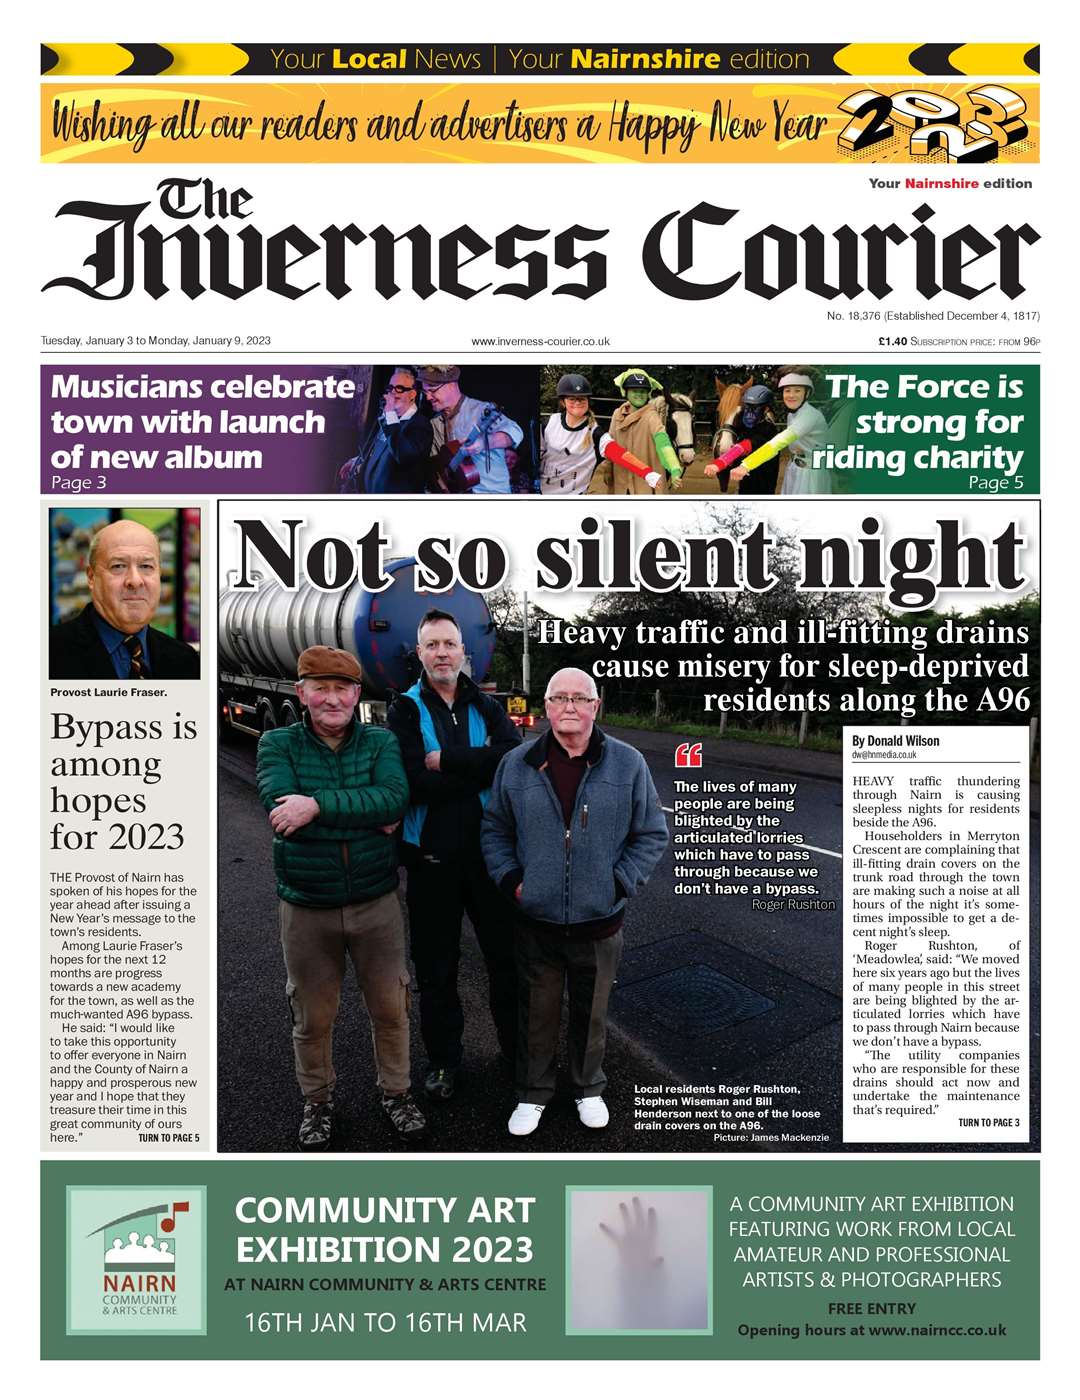 The Inverness Courier (Nairnshire edition), January 3, front page.